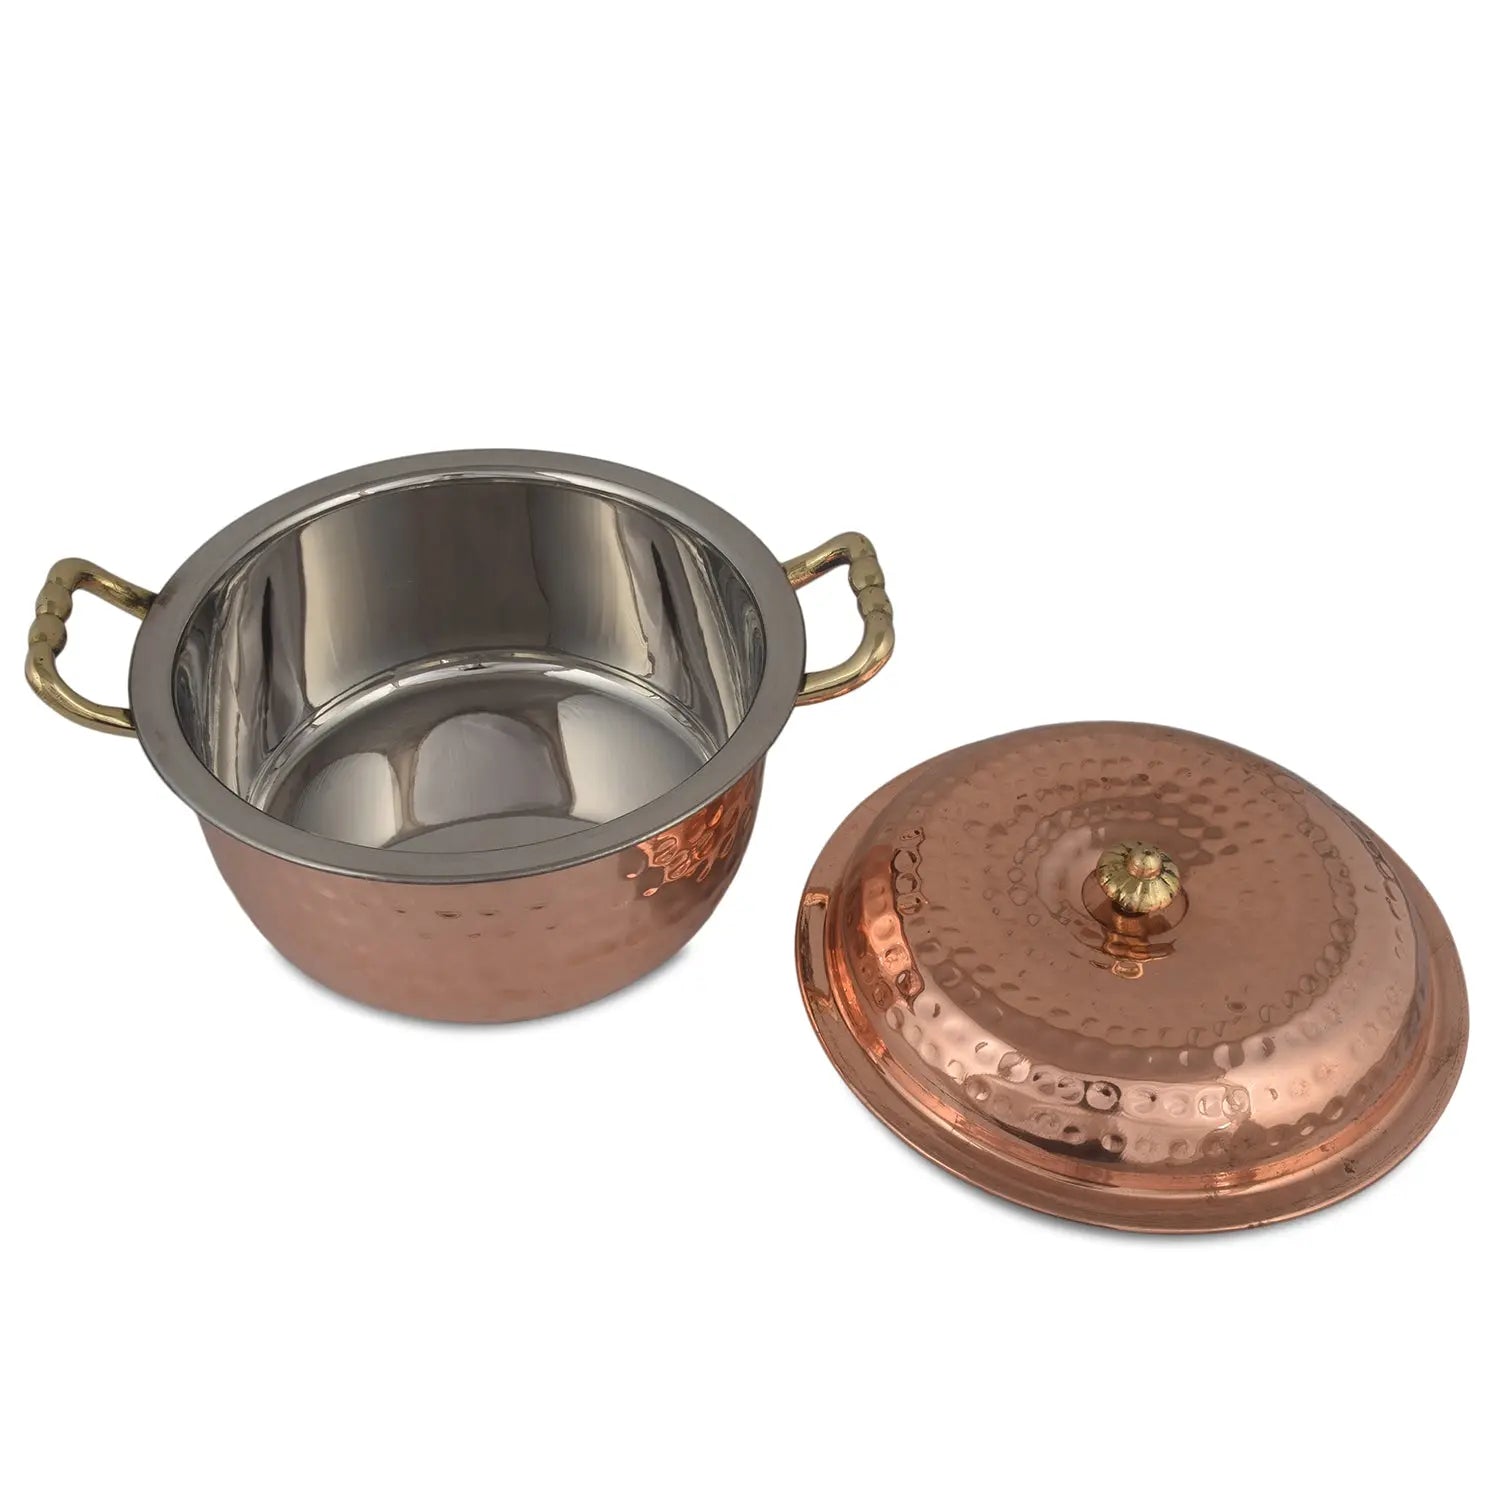 Crockery Wala And Company Copper Steel Donga Indian Serving Donga Chapatti CasseroleTableware For Home & Restaurant - CROCKERY WALA AND COMPANY 